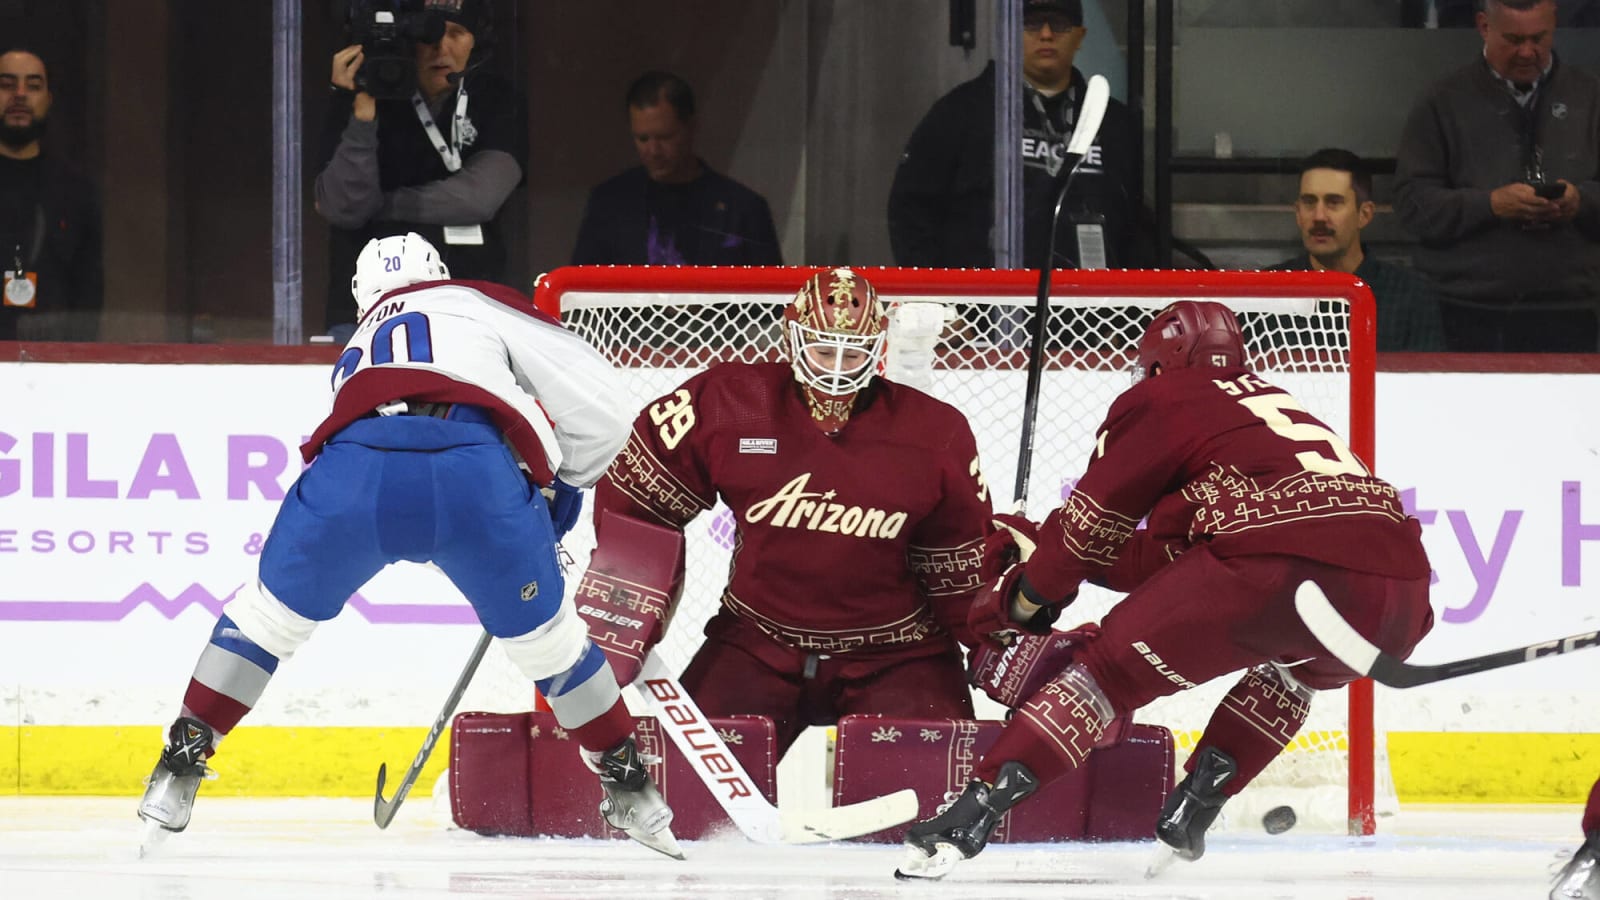 Coyotes’ Connor Ingram Claims No. 1 Role in Net With Great Start